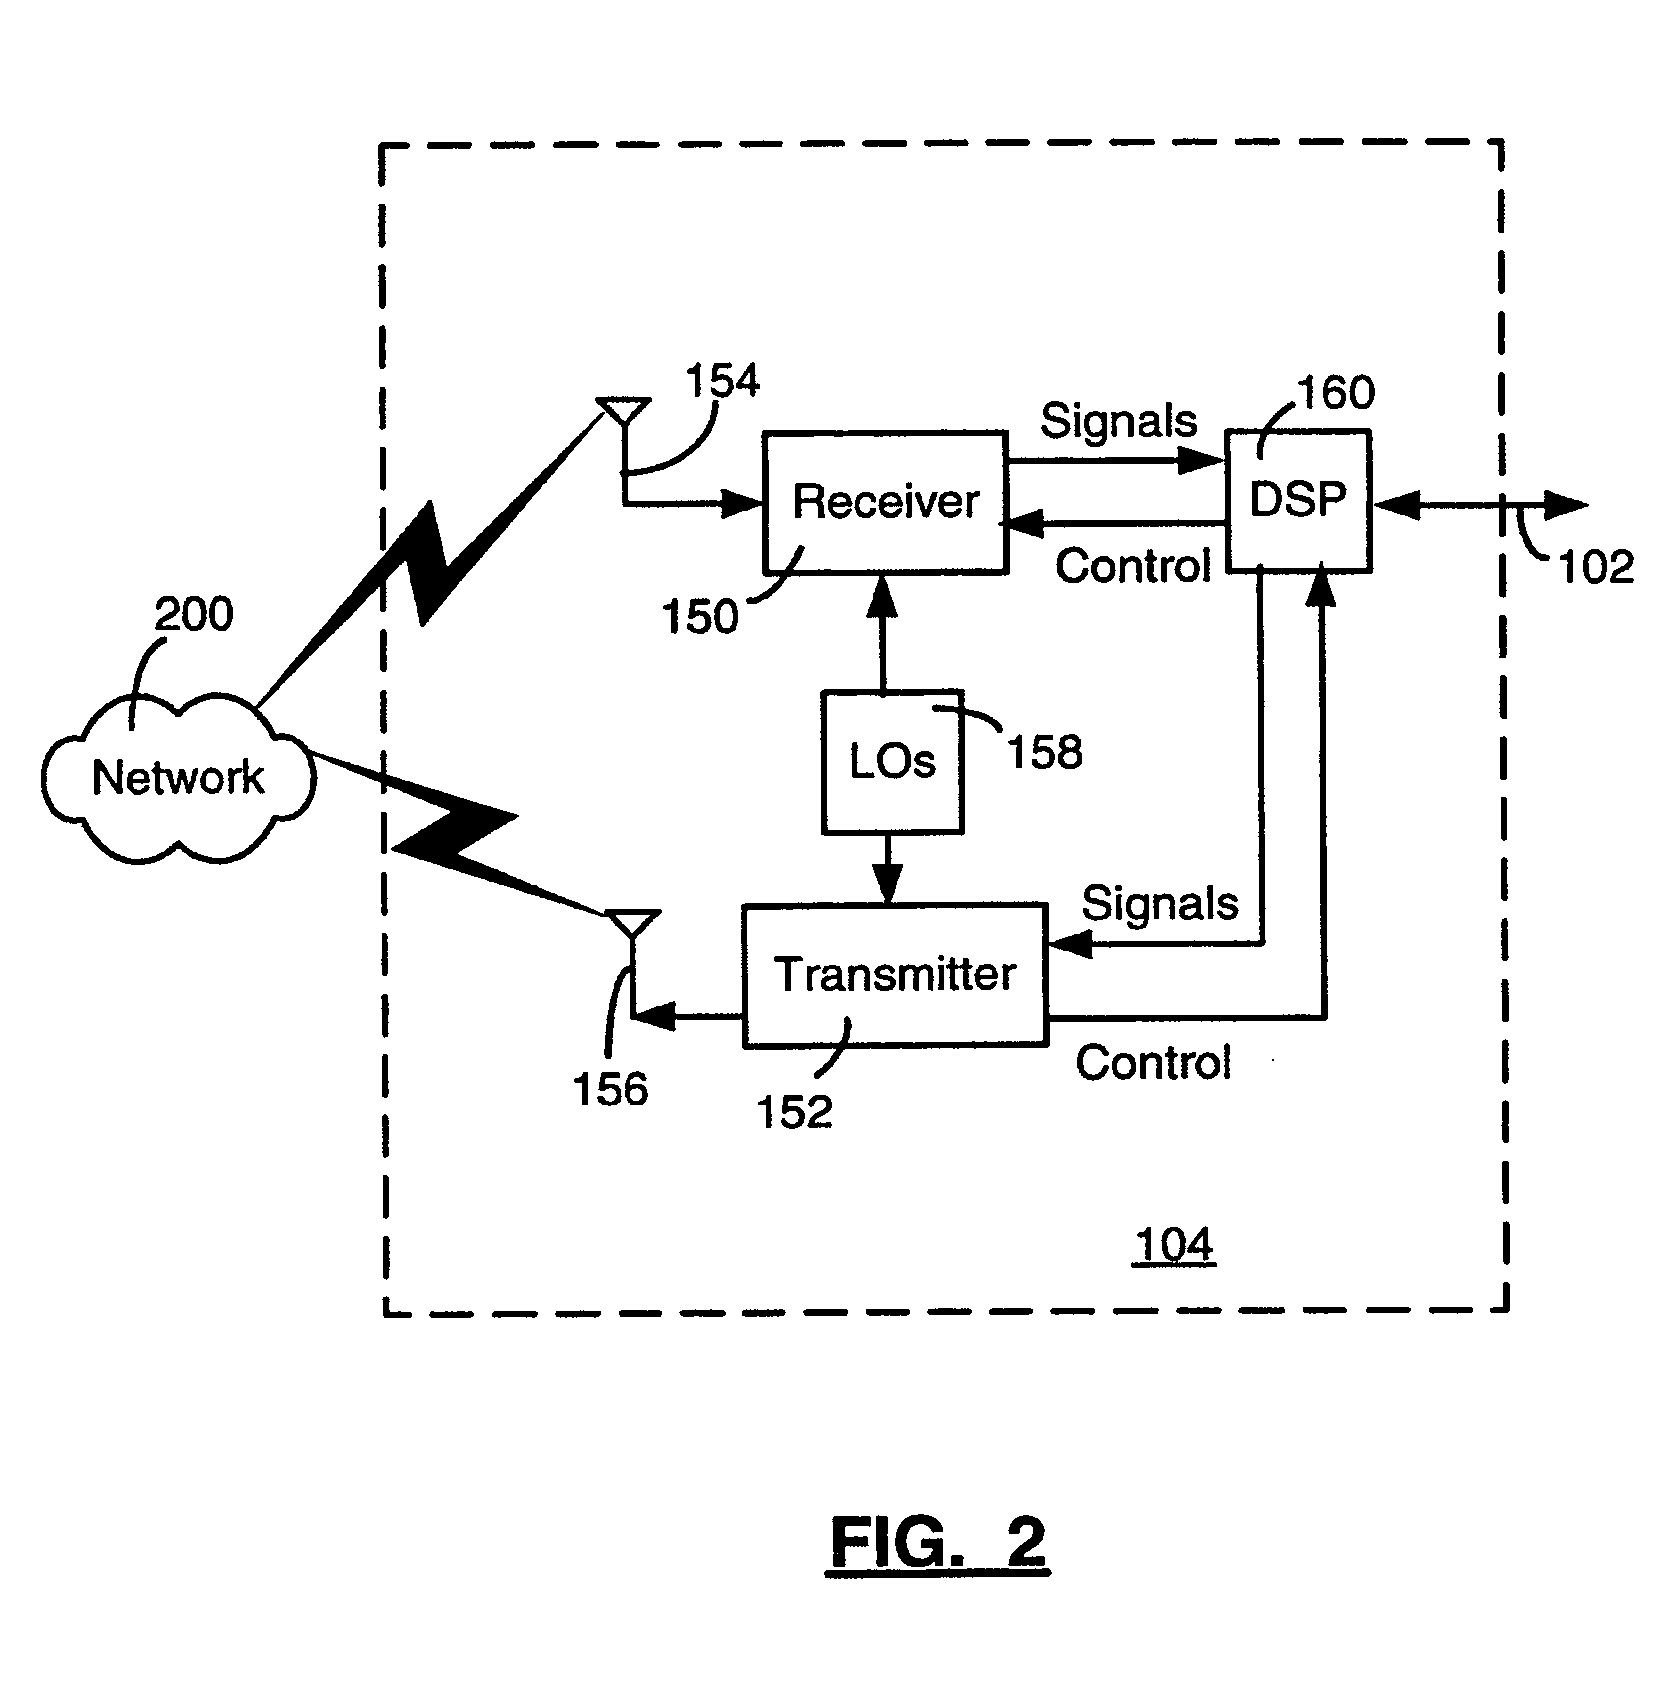 System and method for searching and retrieving certificates